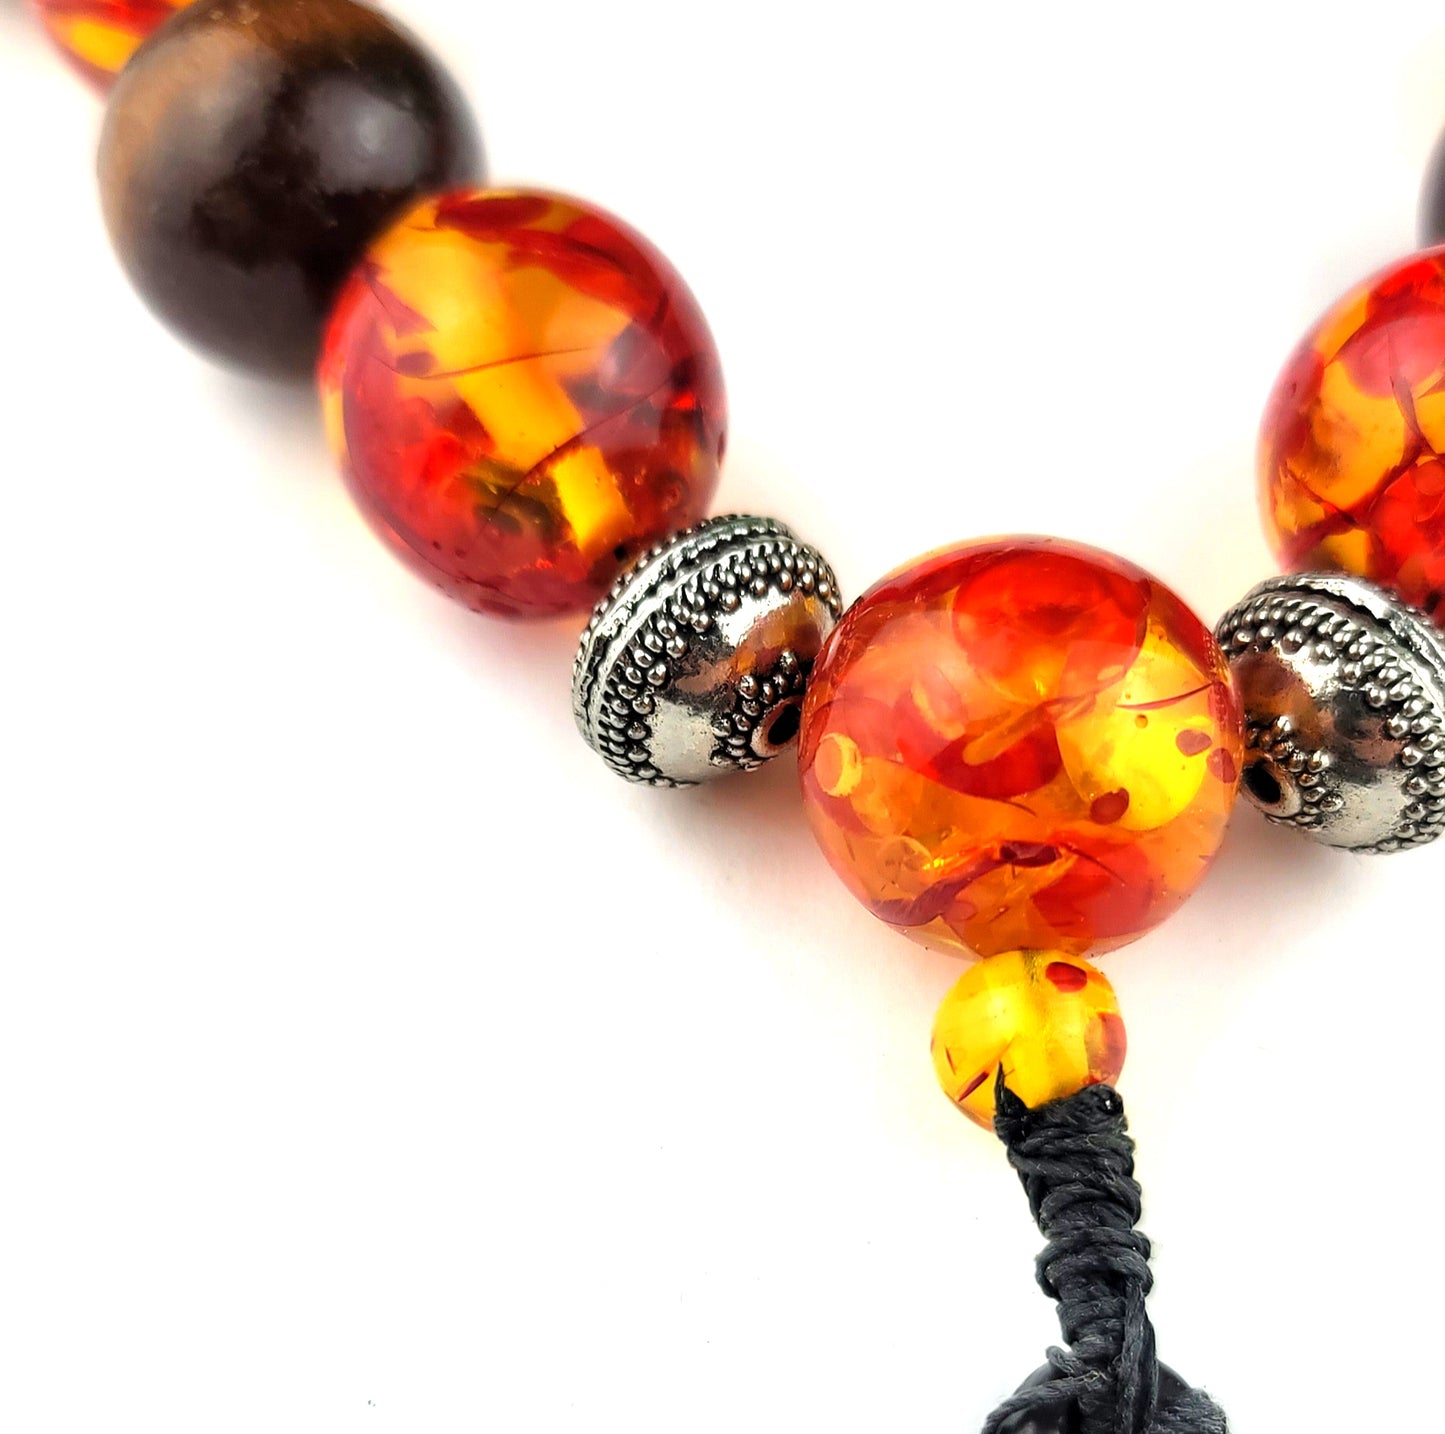 Synthetic Amber, Bodhi Wood Grand Master Mala Necklace by J.J. Dean